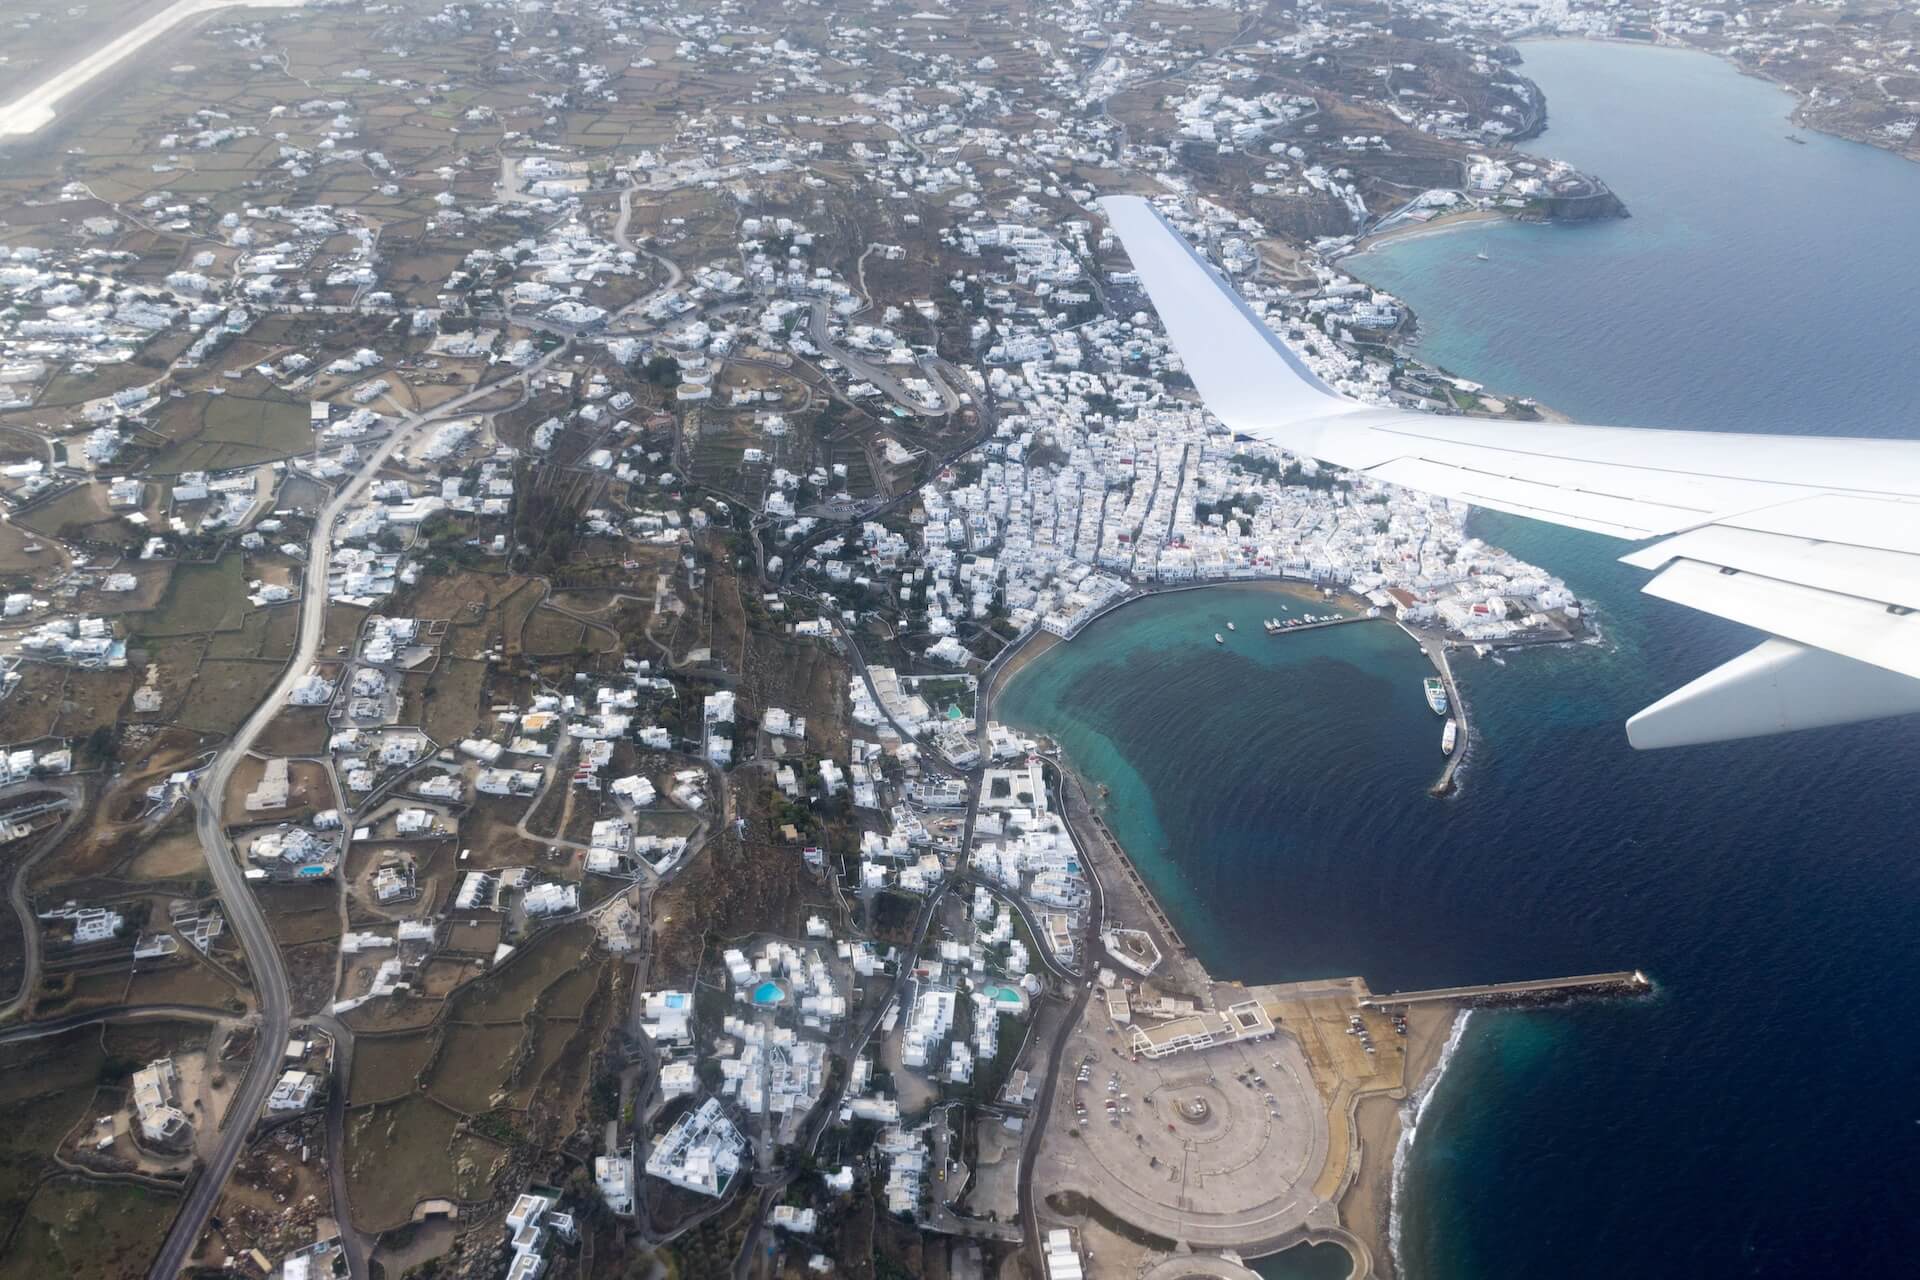 Mykonos town viewed from an airplane